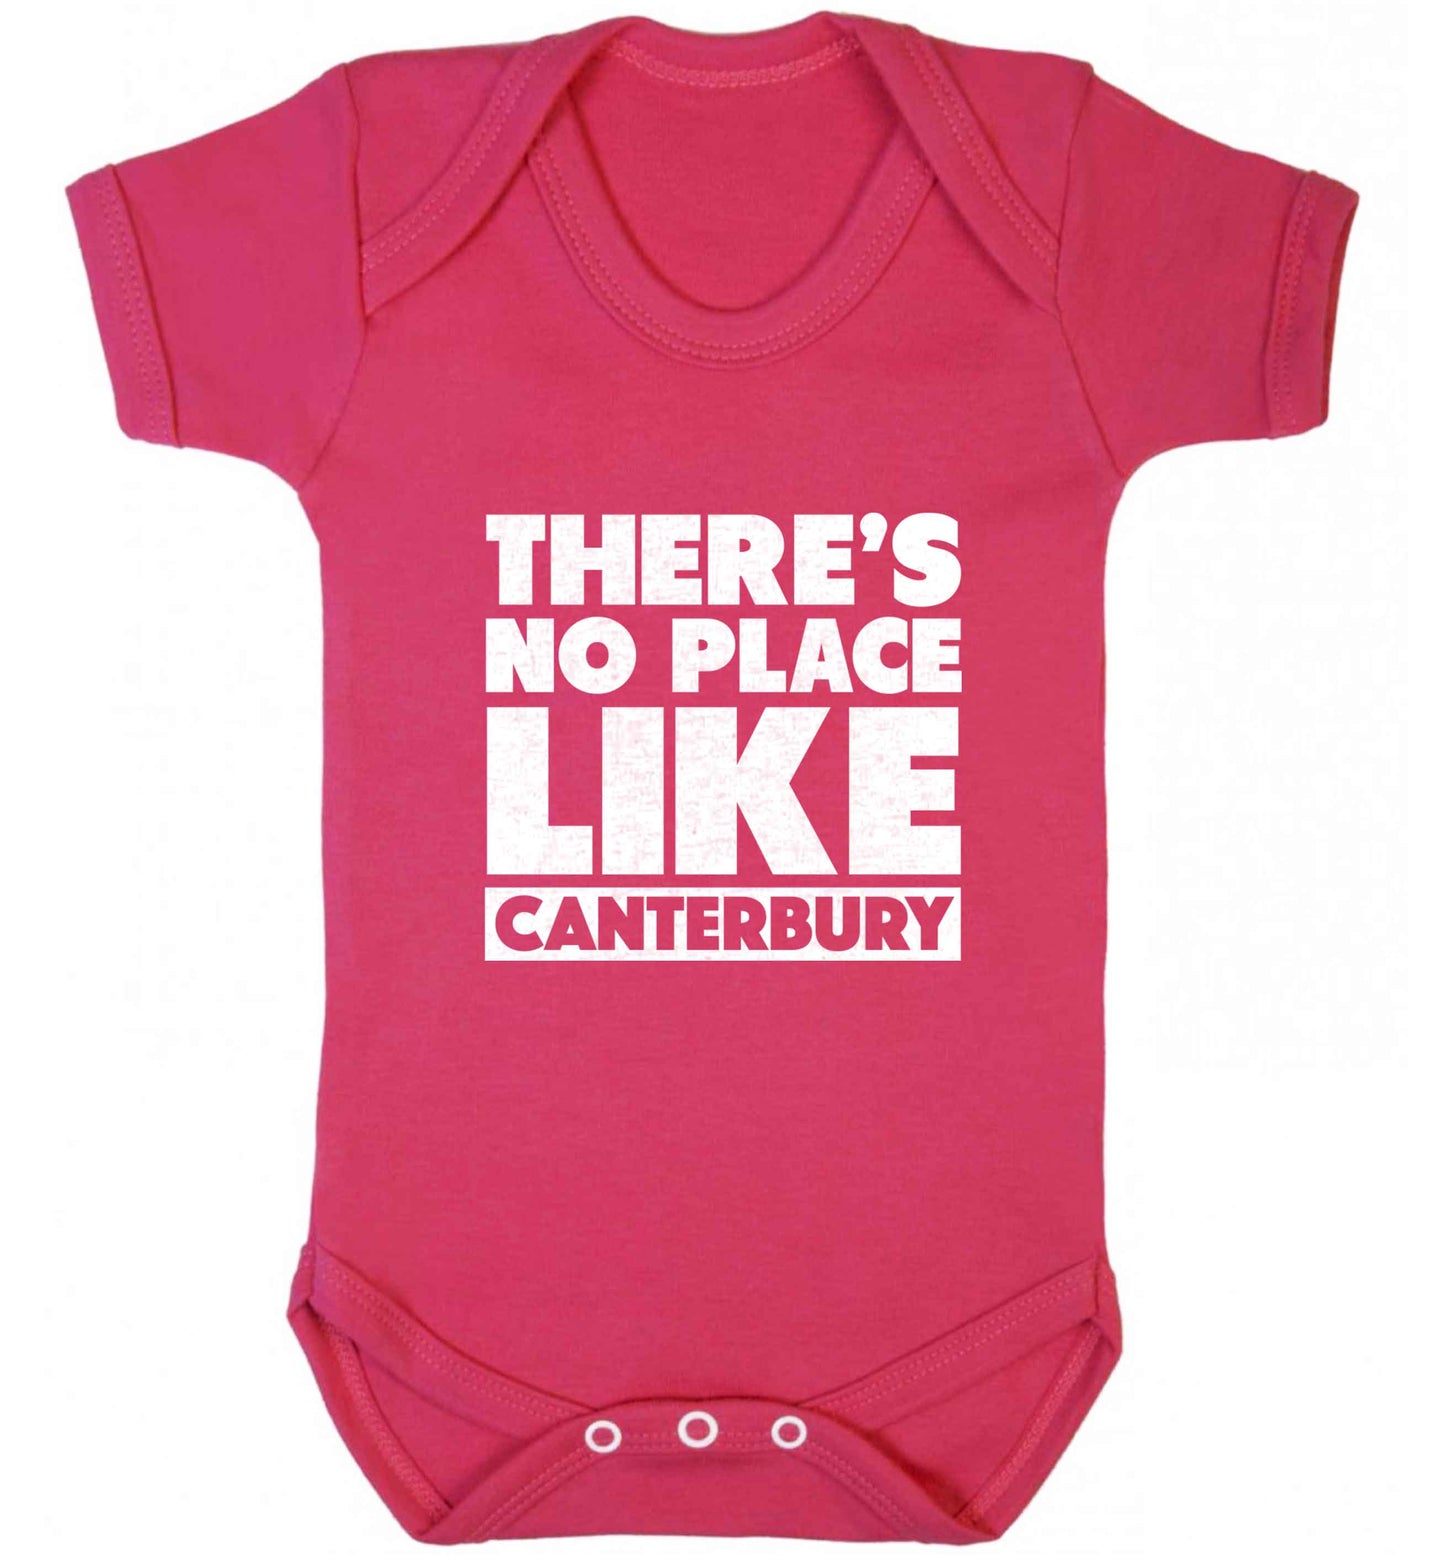 There's no place like Canterbury baby vest dark pink 18-24 months